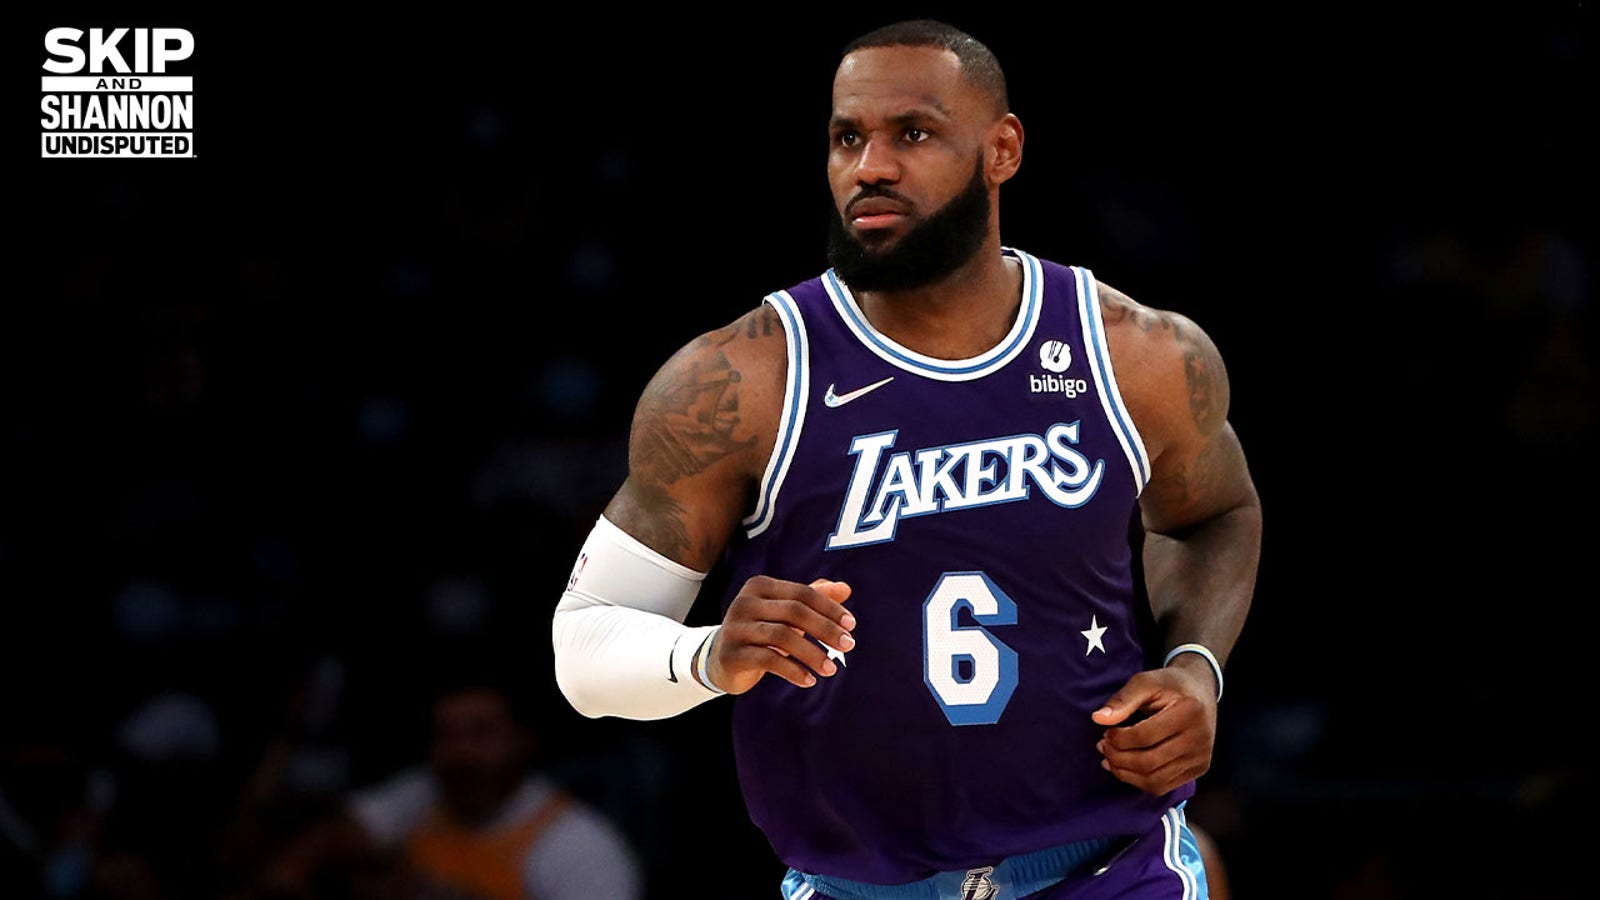 Will LeBron pen two-year, $97 million extension with Lakers?